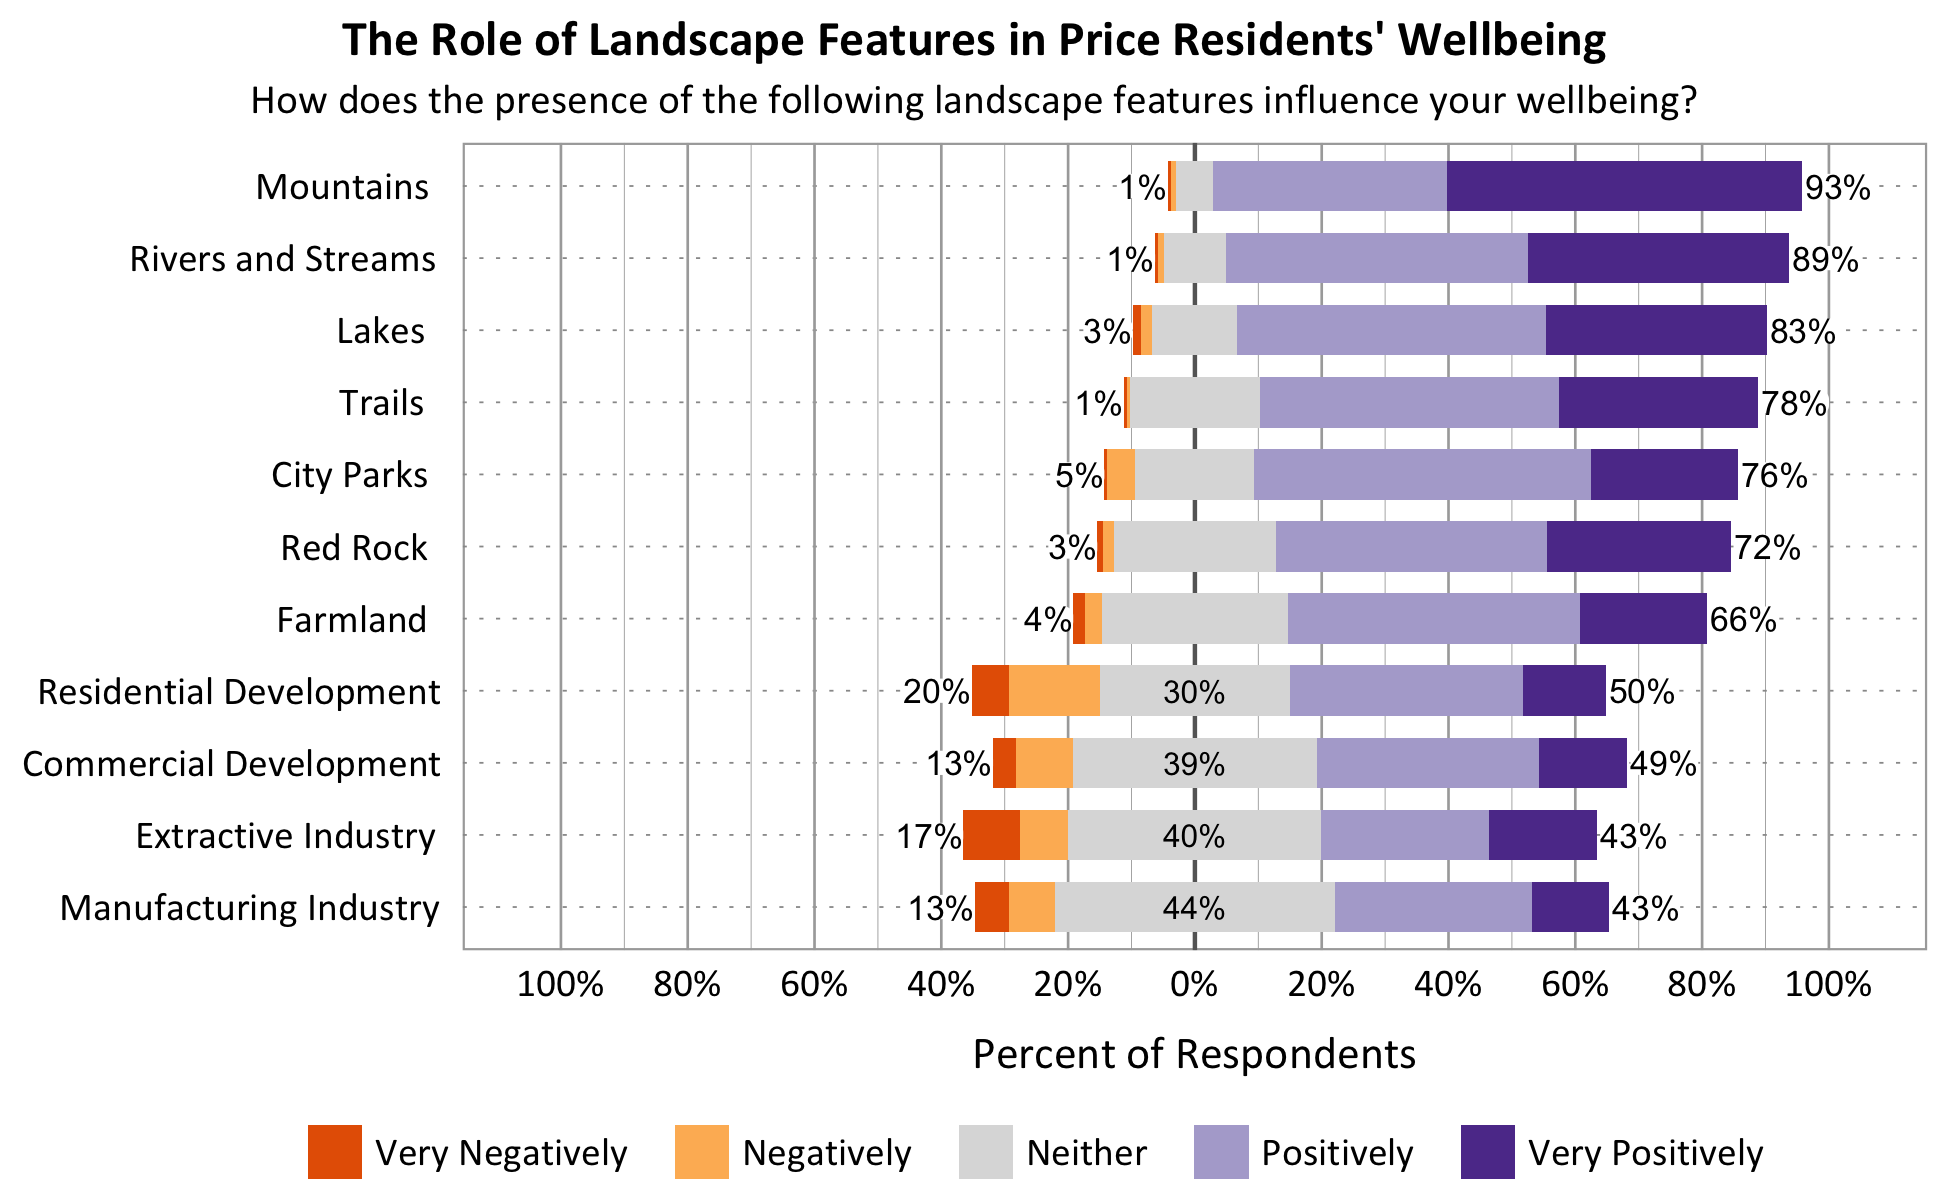 Likert Graph. Title: The Role of Landscape Features in Price Residents' Wellbeing. Subtitle: How does the presence of the following landscape features influence your wellbeing? Feature: Mountains - 1% of respondents indicated very negatively or negatively, 6% indicated neither, 93% indicated positively or very positively; Feature: Rivers and Streams - 1% of respondents indicated very negatively or negatively, 10% indicated neither, 89% indicated positively or very positively; Feature: Lakes - 3% of respondents indicated very negatively or negatively, 14% indicated neither, 83% indicated positively or very positively; Feature: Trails - 1% of respondents indicated very negatively or negatively, 21% indicated neither, 78% indicated positively or very positively; Feature: Red Rock - 3% of respondents indicated very negatively or negatively, 25% indicated neither, 72% indicated positively or very positively; Feature: City Parks - 5% of respondents indicated very negatively or negatively, 19% indicated neither, 76% indicated positively or very positively; Feature: Farmland - 4% of respondents indicated very negatively or negatively, 30% indicated neither, 66% indicated positively or very positively; Feature: Residential Development - 20% of respondents indicated very negatively or negatively, 30% indicated neither, 50% indicated positively or very positively; Feature: Commercial Development - 13% of respondents indicated very negatively or negatively, 39% indicated neither, 49% indicated positively or very positively; Feature: Extractive Industry - 17% of respondents indicated very negatively or negatively, 40% indicated neither, 43% indicated positively or very positively; Feature: Manufacturing Industry - 13% of respondents indicated very negatively or negatively, 44% indicated neither, 43% indicated positively or very positively.